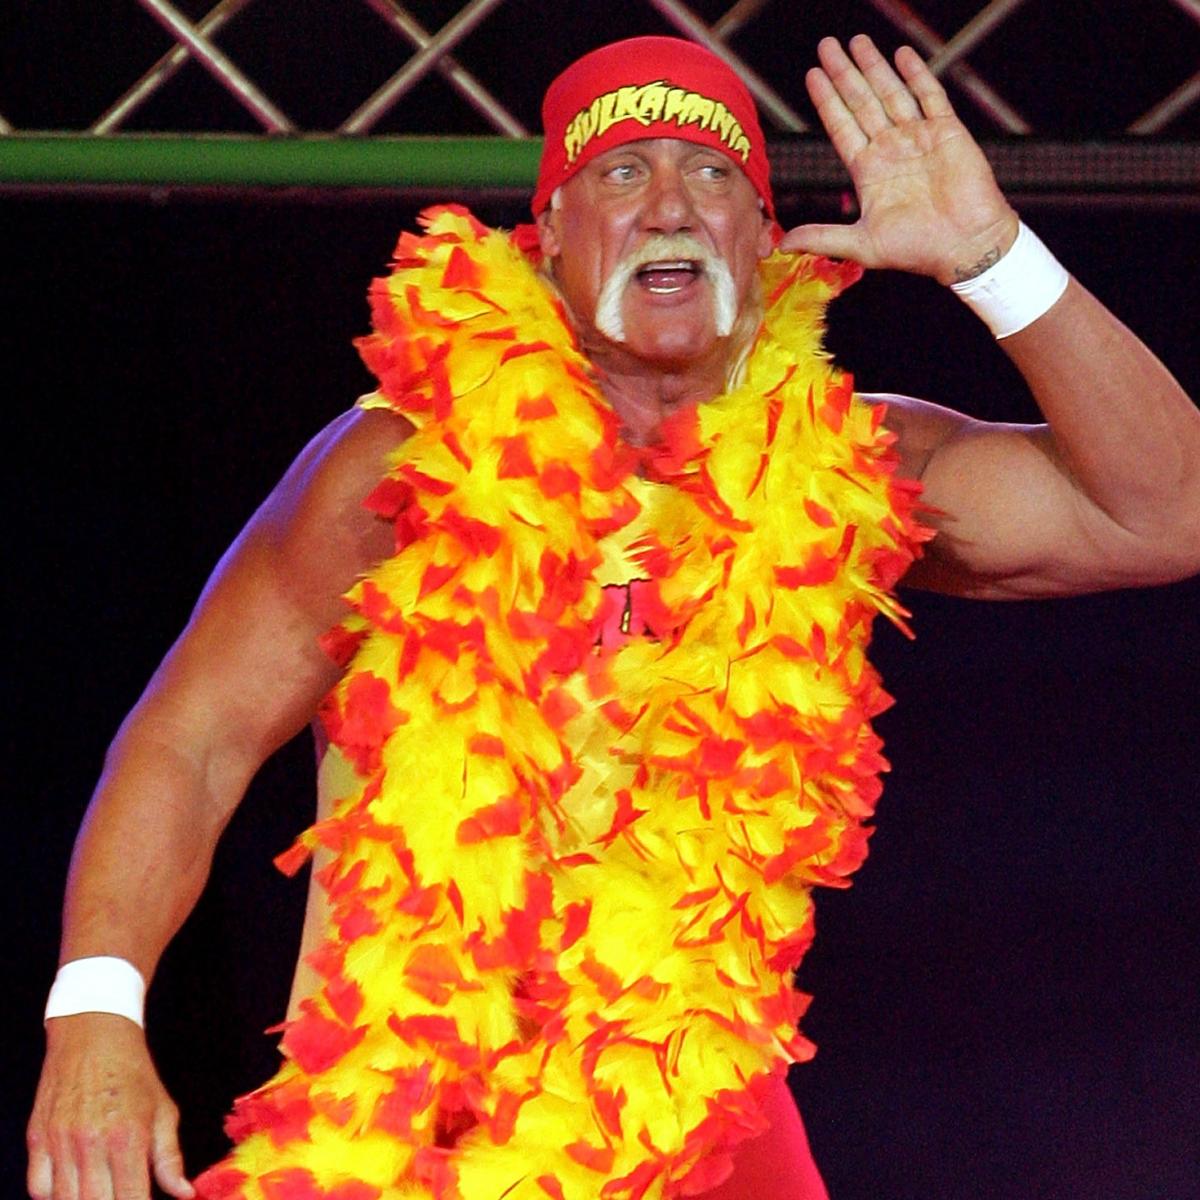 Hulk Hogan Sings Lady Gaga in Video as a Promotion of Fitness Challenge ...